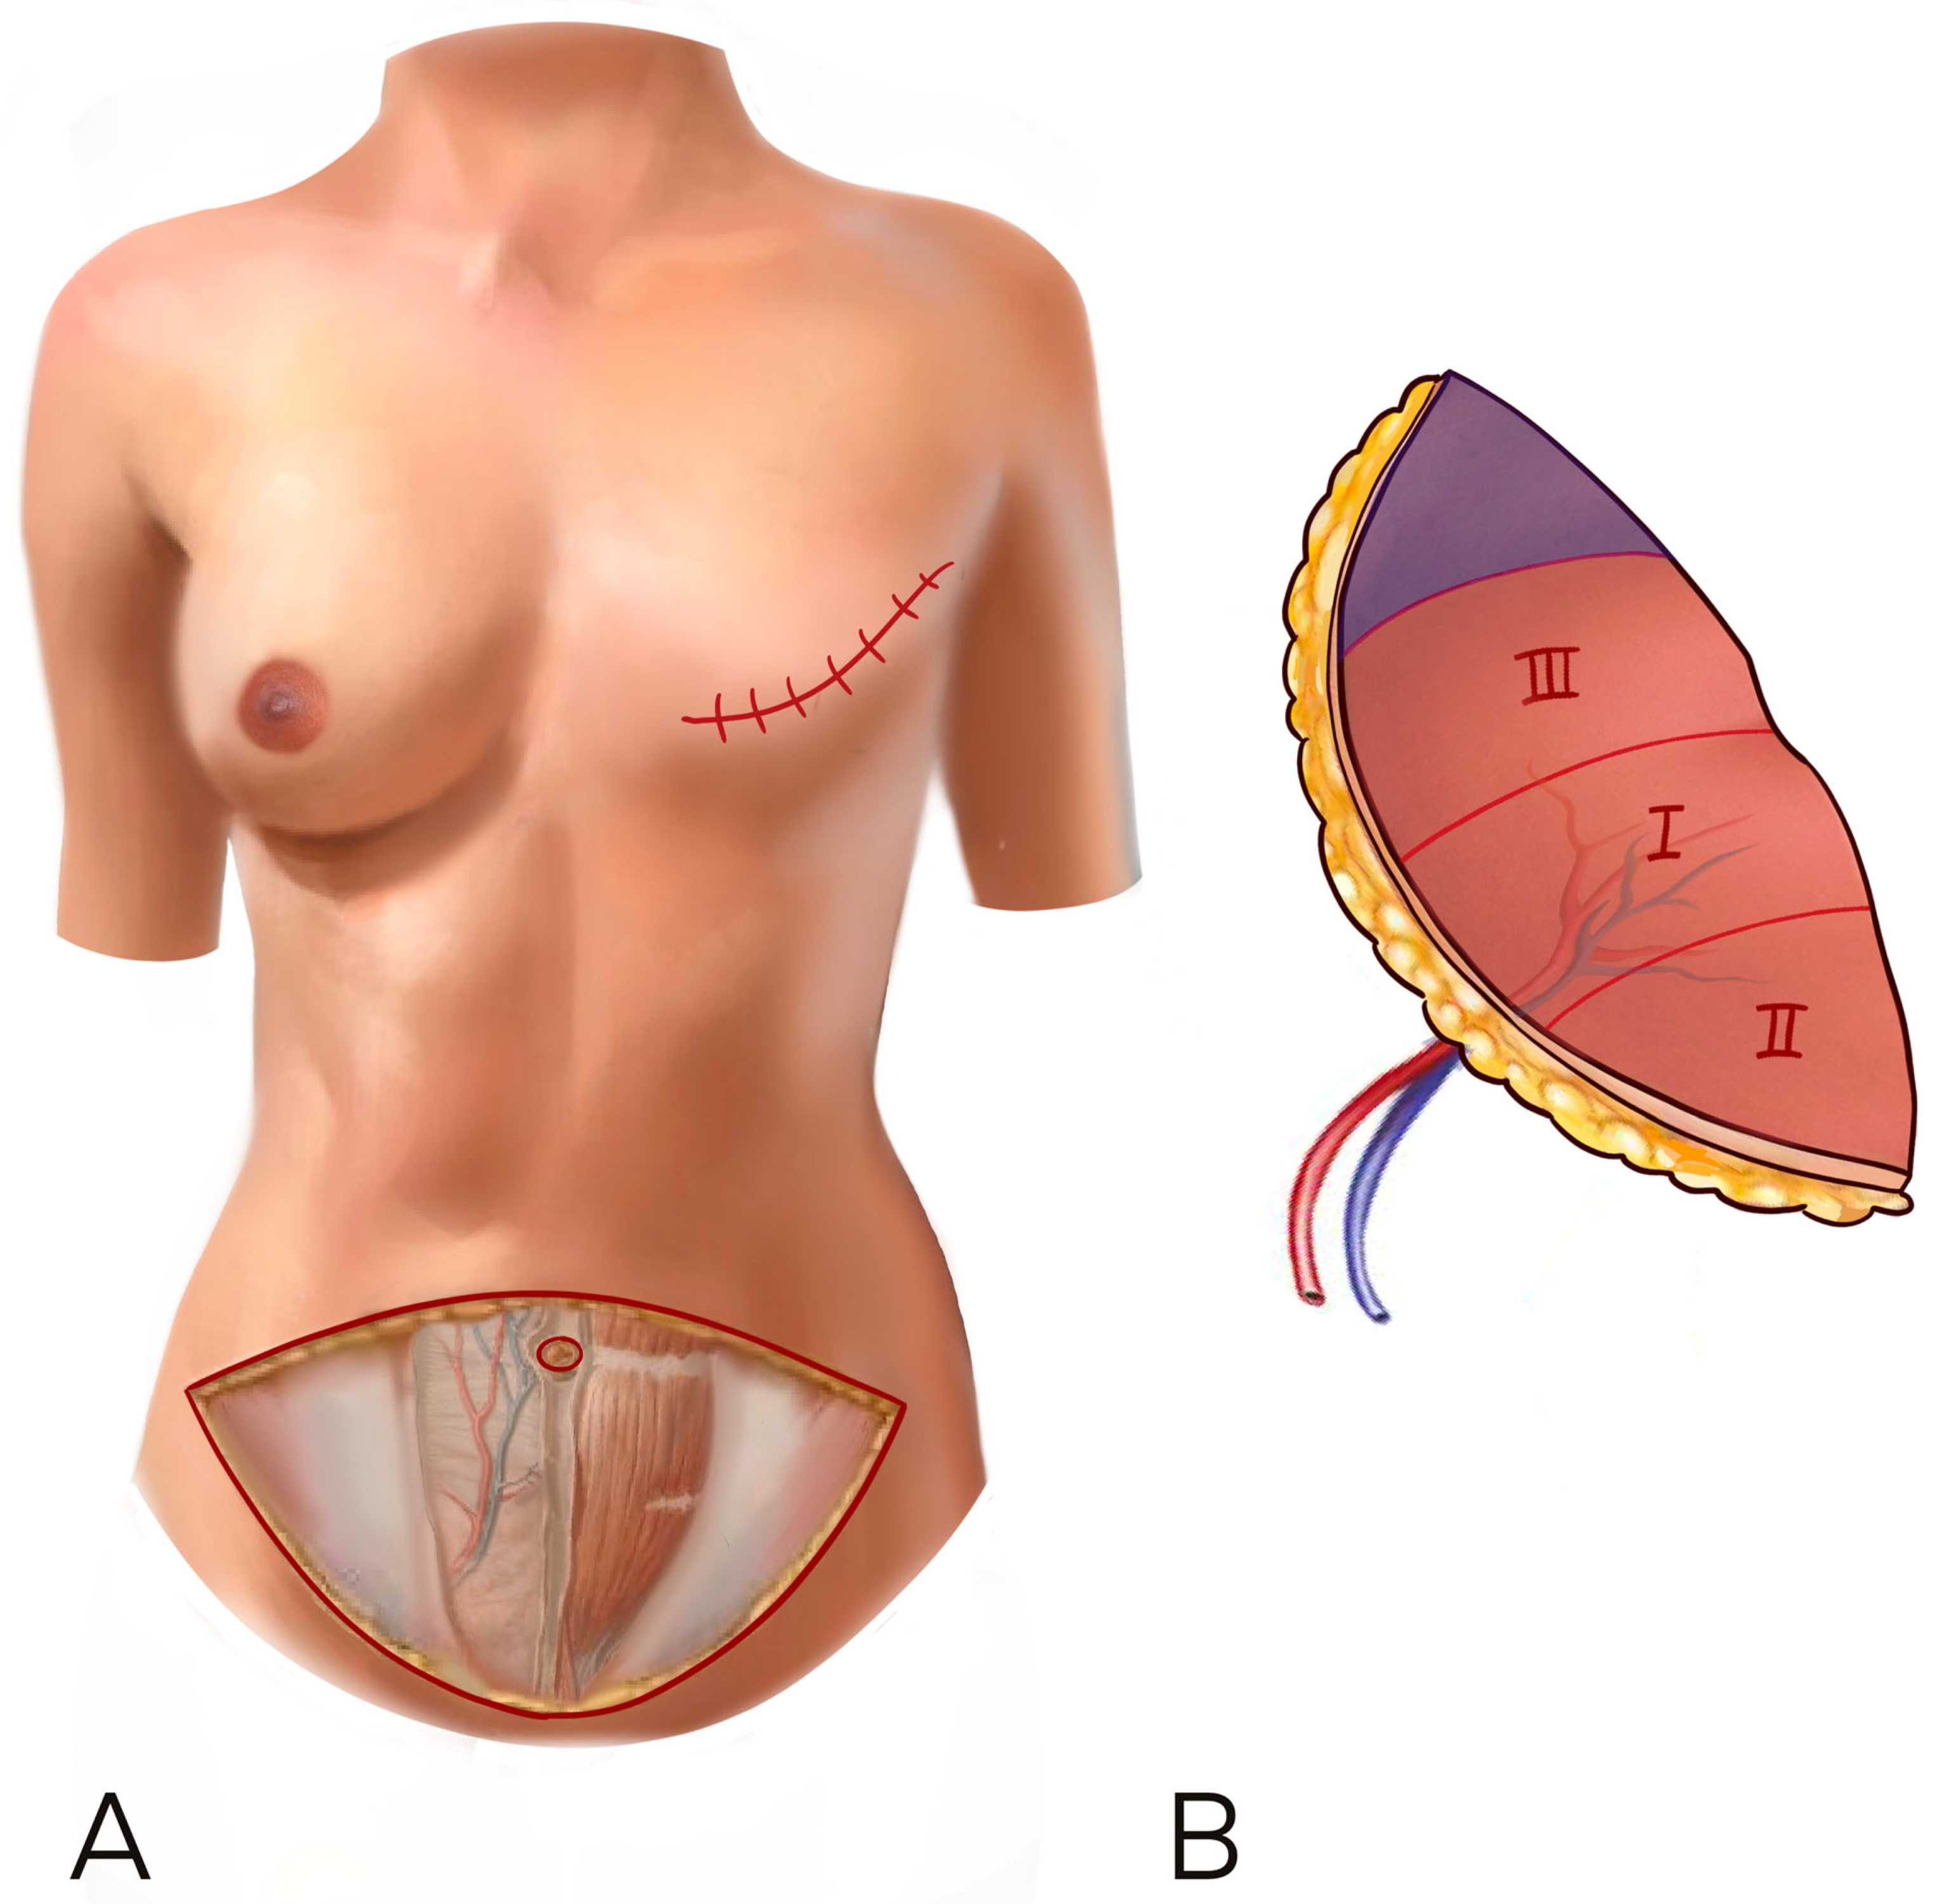 RBCP - Breast reconstruction with implant: creating a pocket with a reverse  serratus anterior muscle flap